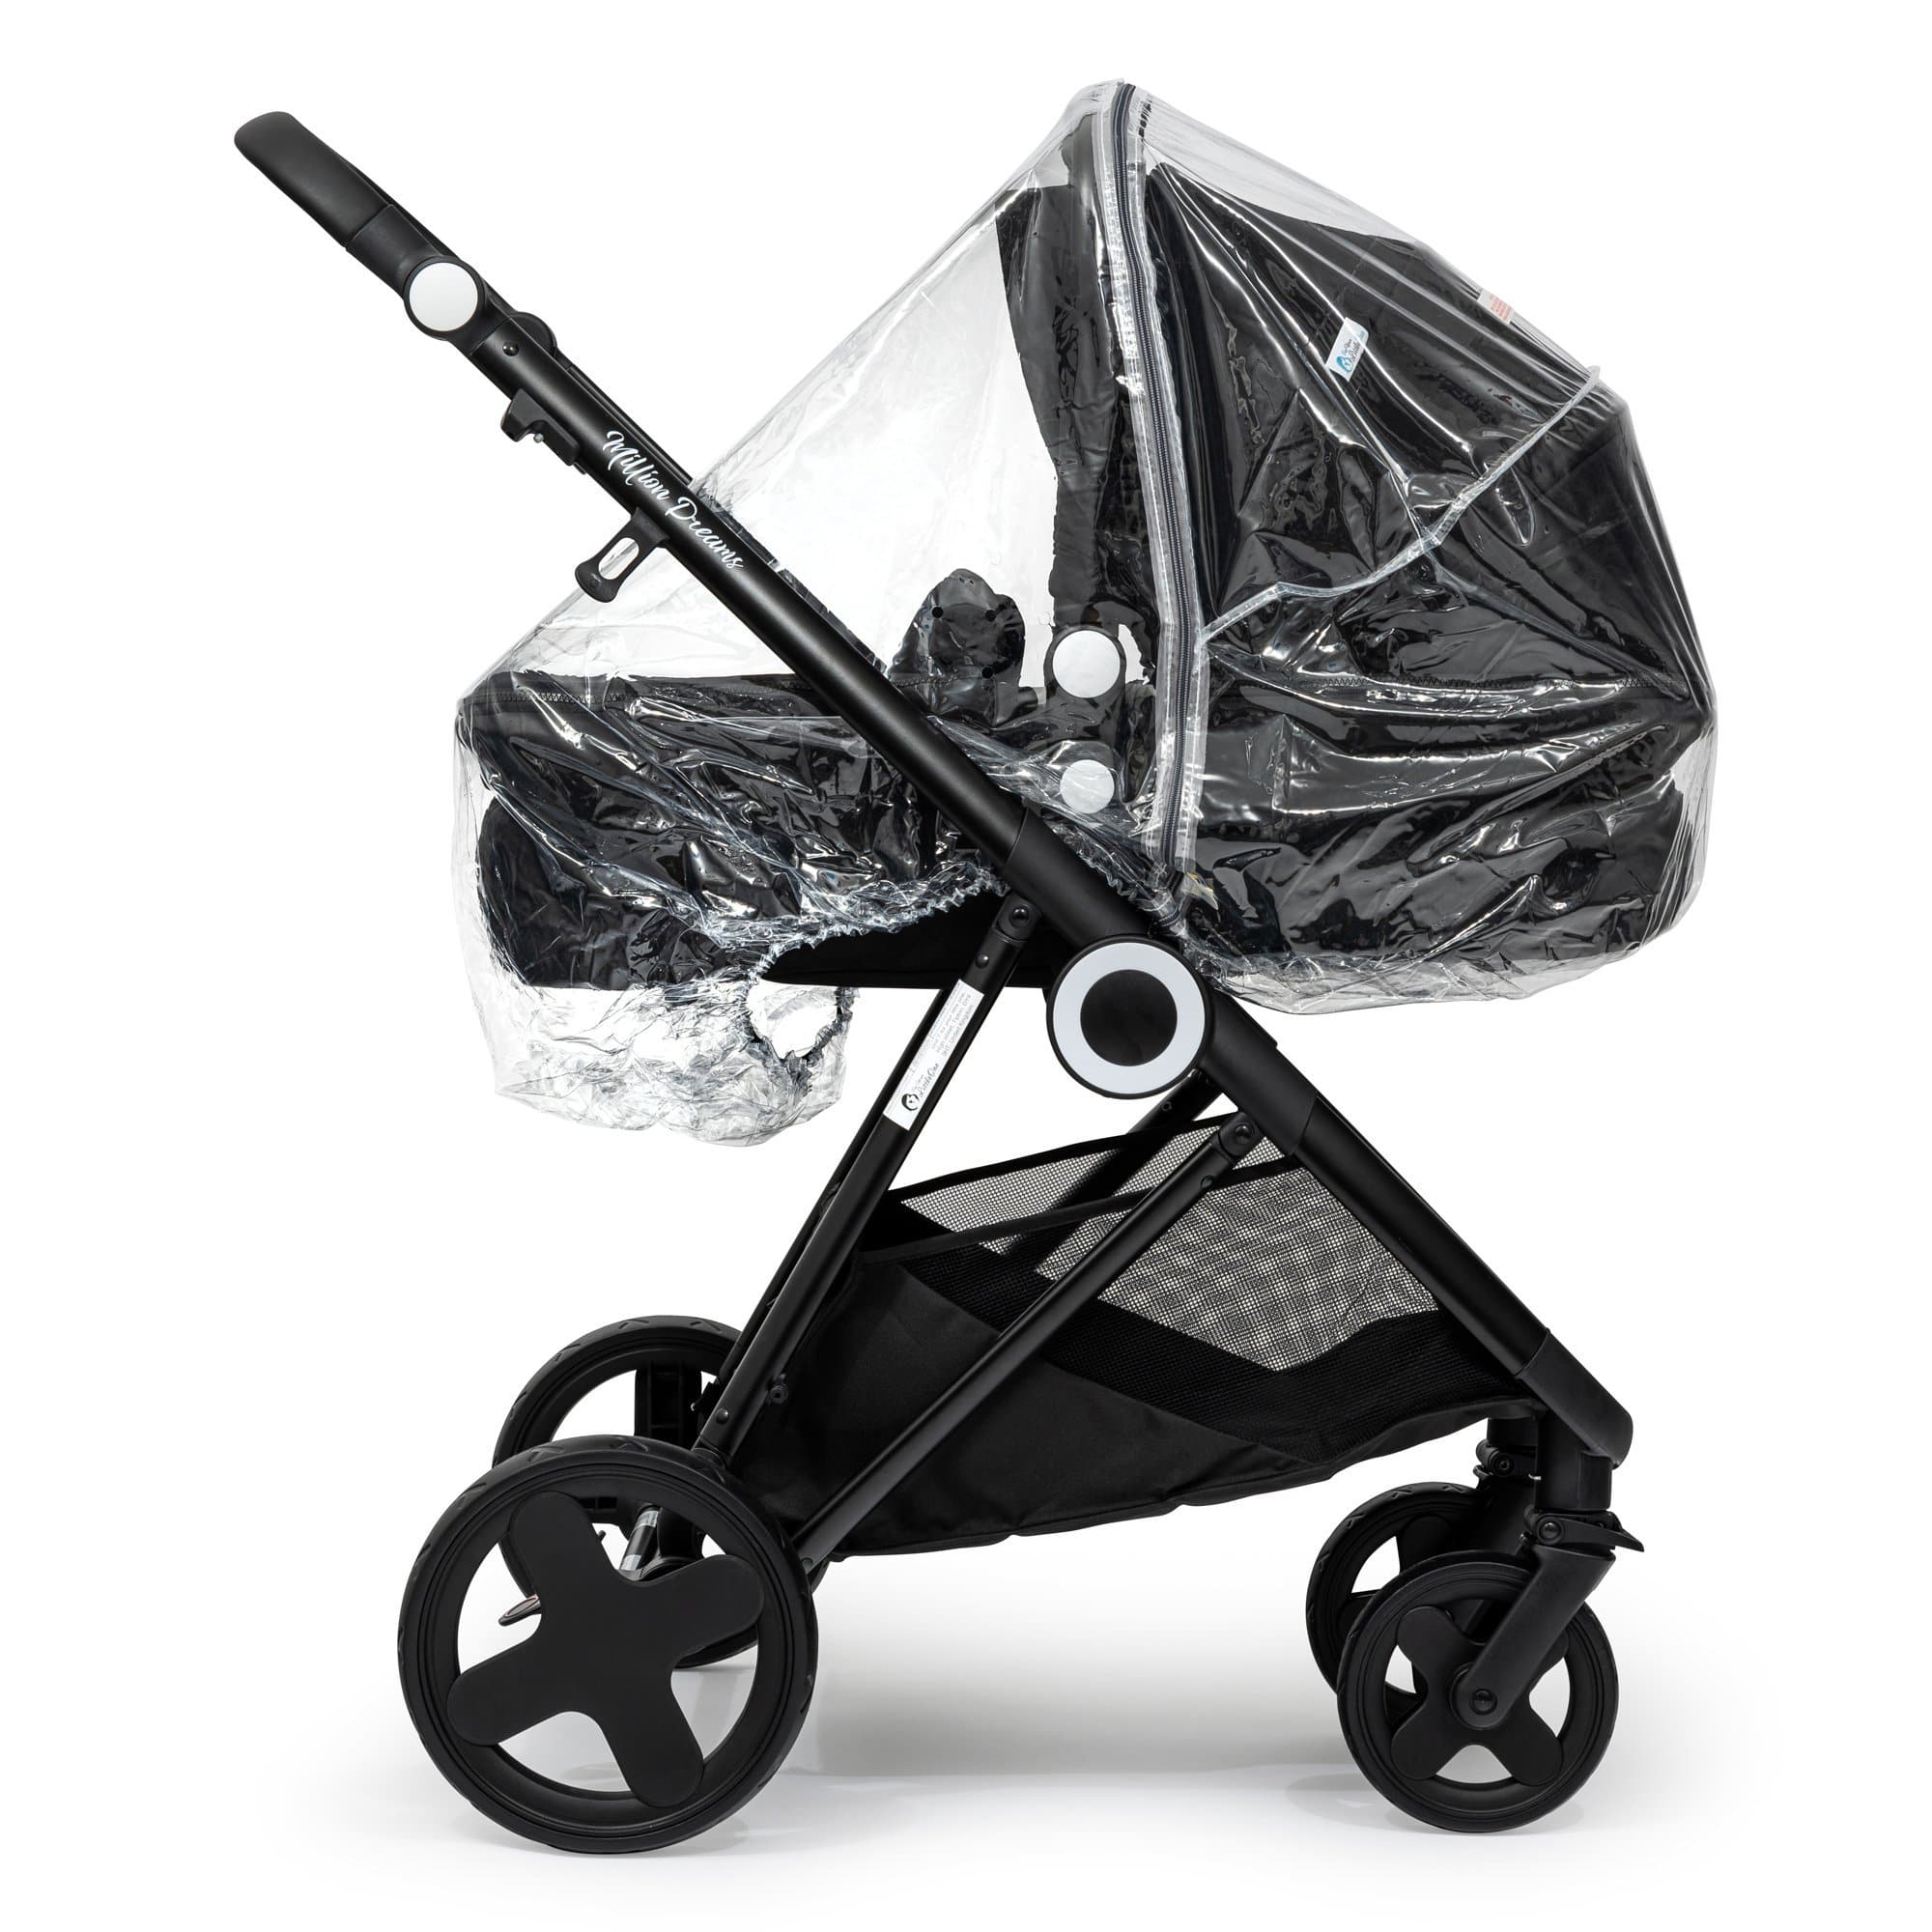 2 in 1 Rain Cover Compatible with Brio - Fits All Models - For Your Little One